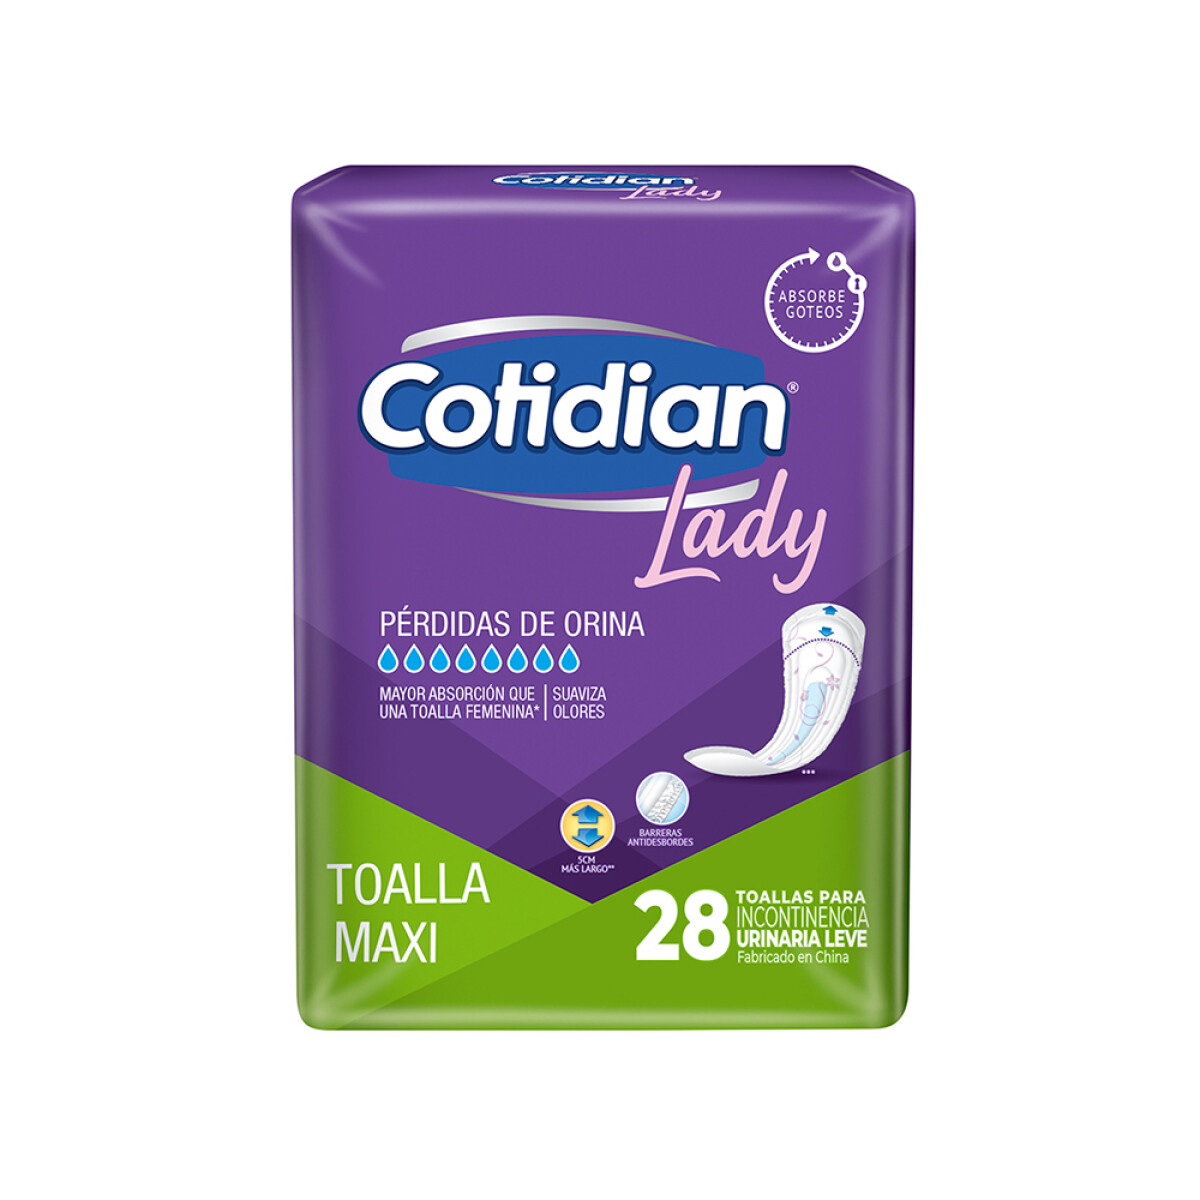 Toallas Cotidian Lady Maxi 28 Uds. 